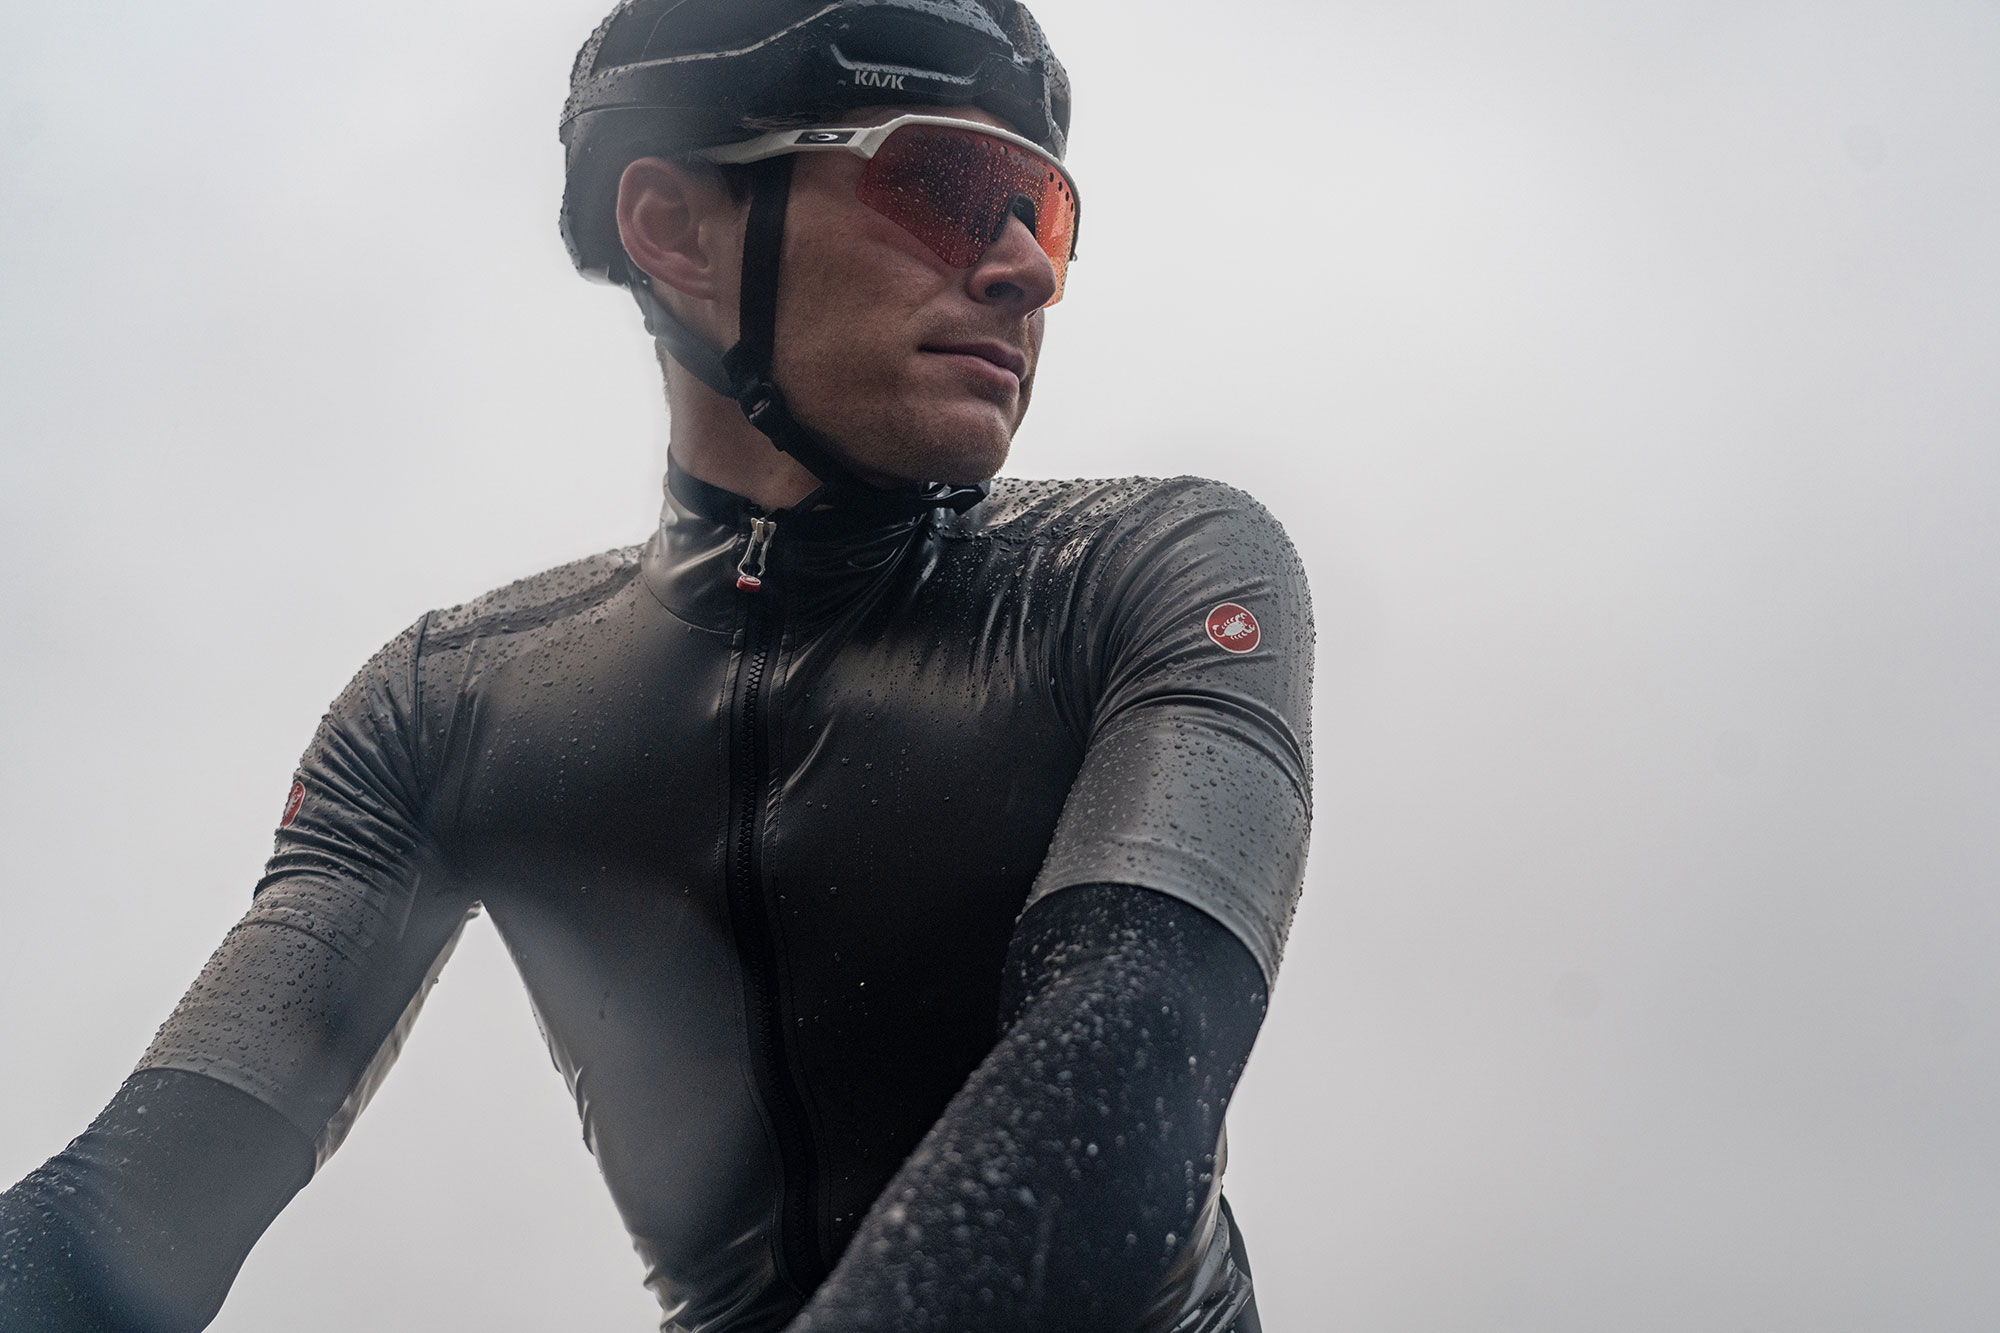 Castelli Gabba R all-new 6th gen of iconic foul wet weather racing jersey and jacket